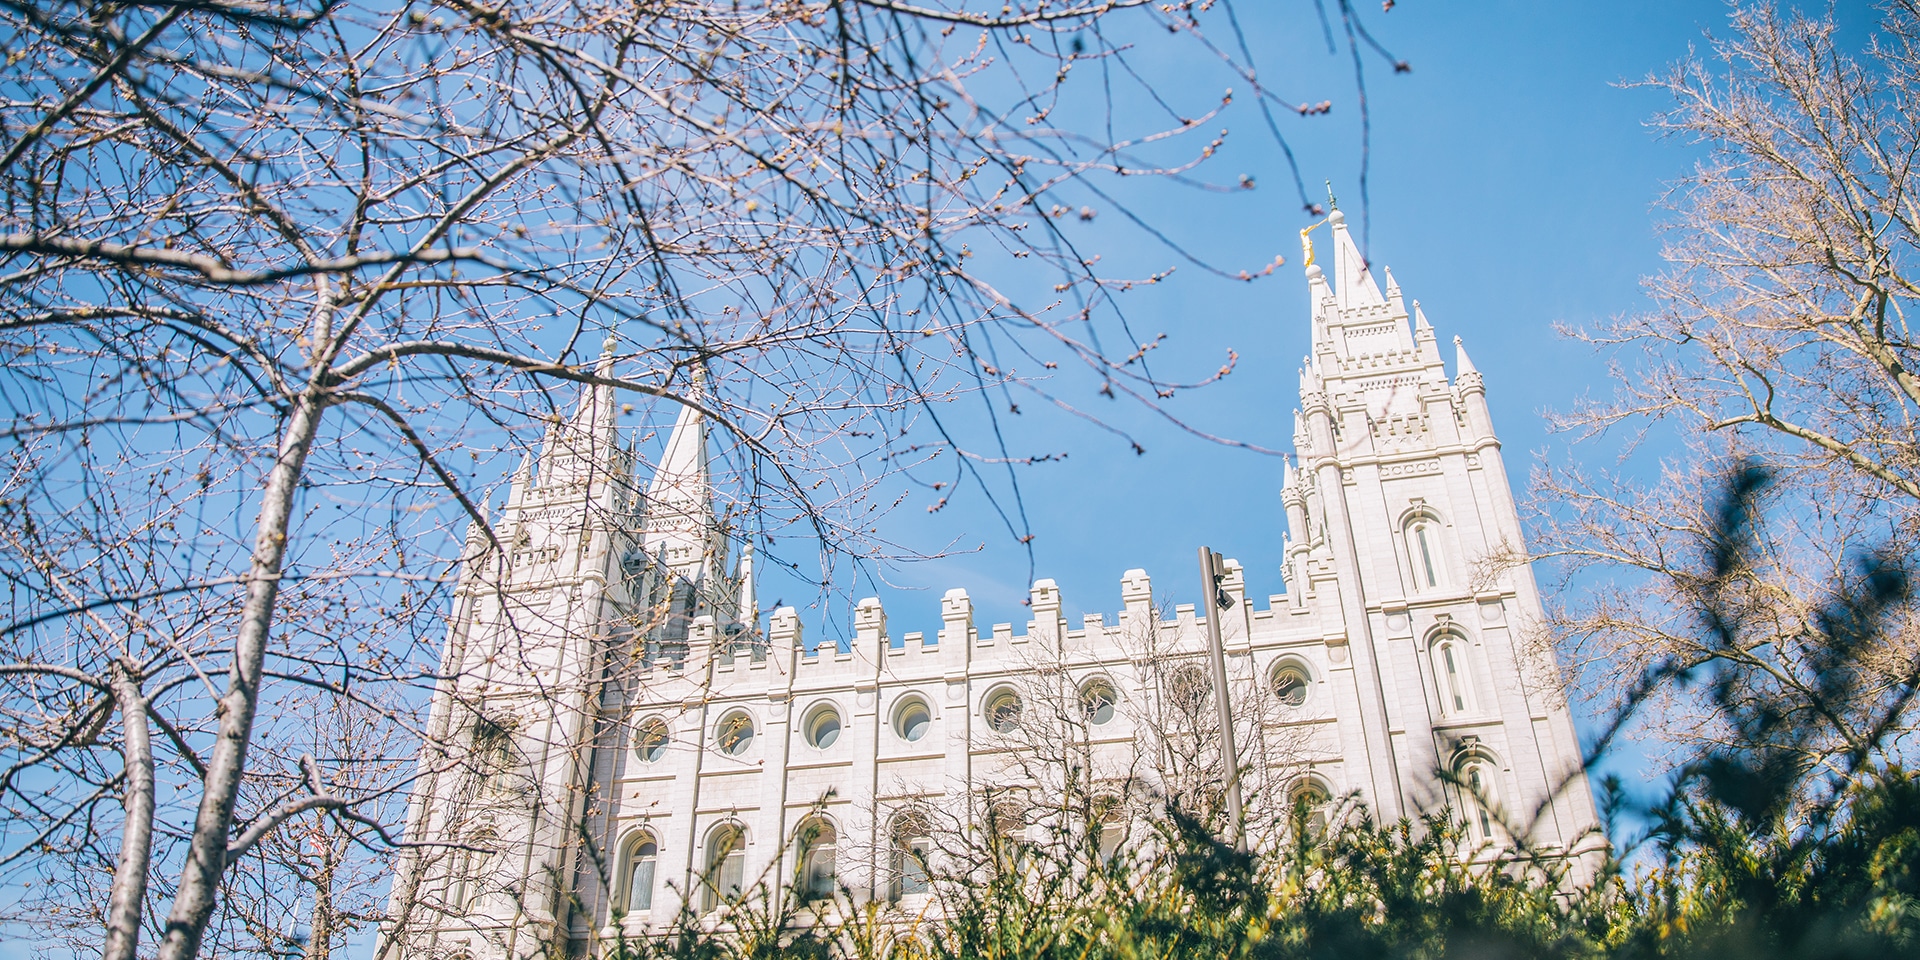 Free attractions and things to do in Salt Lake City.